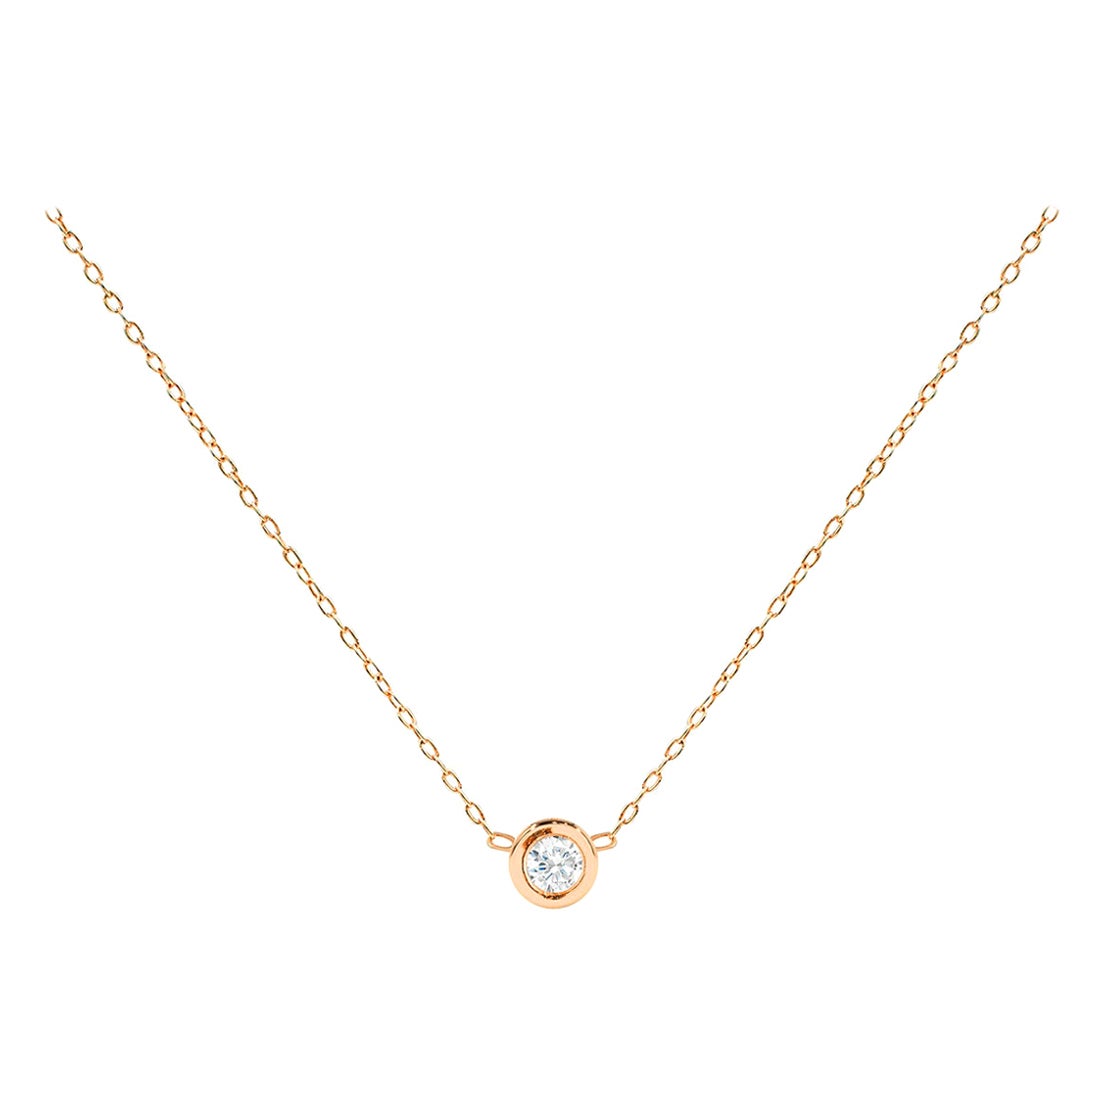 18k Gold 0.20 Carat Diamond Solitaire Necklace in Bezel Setting